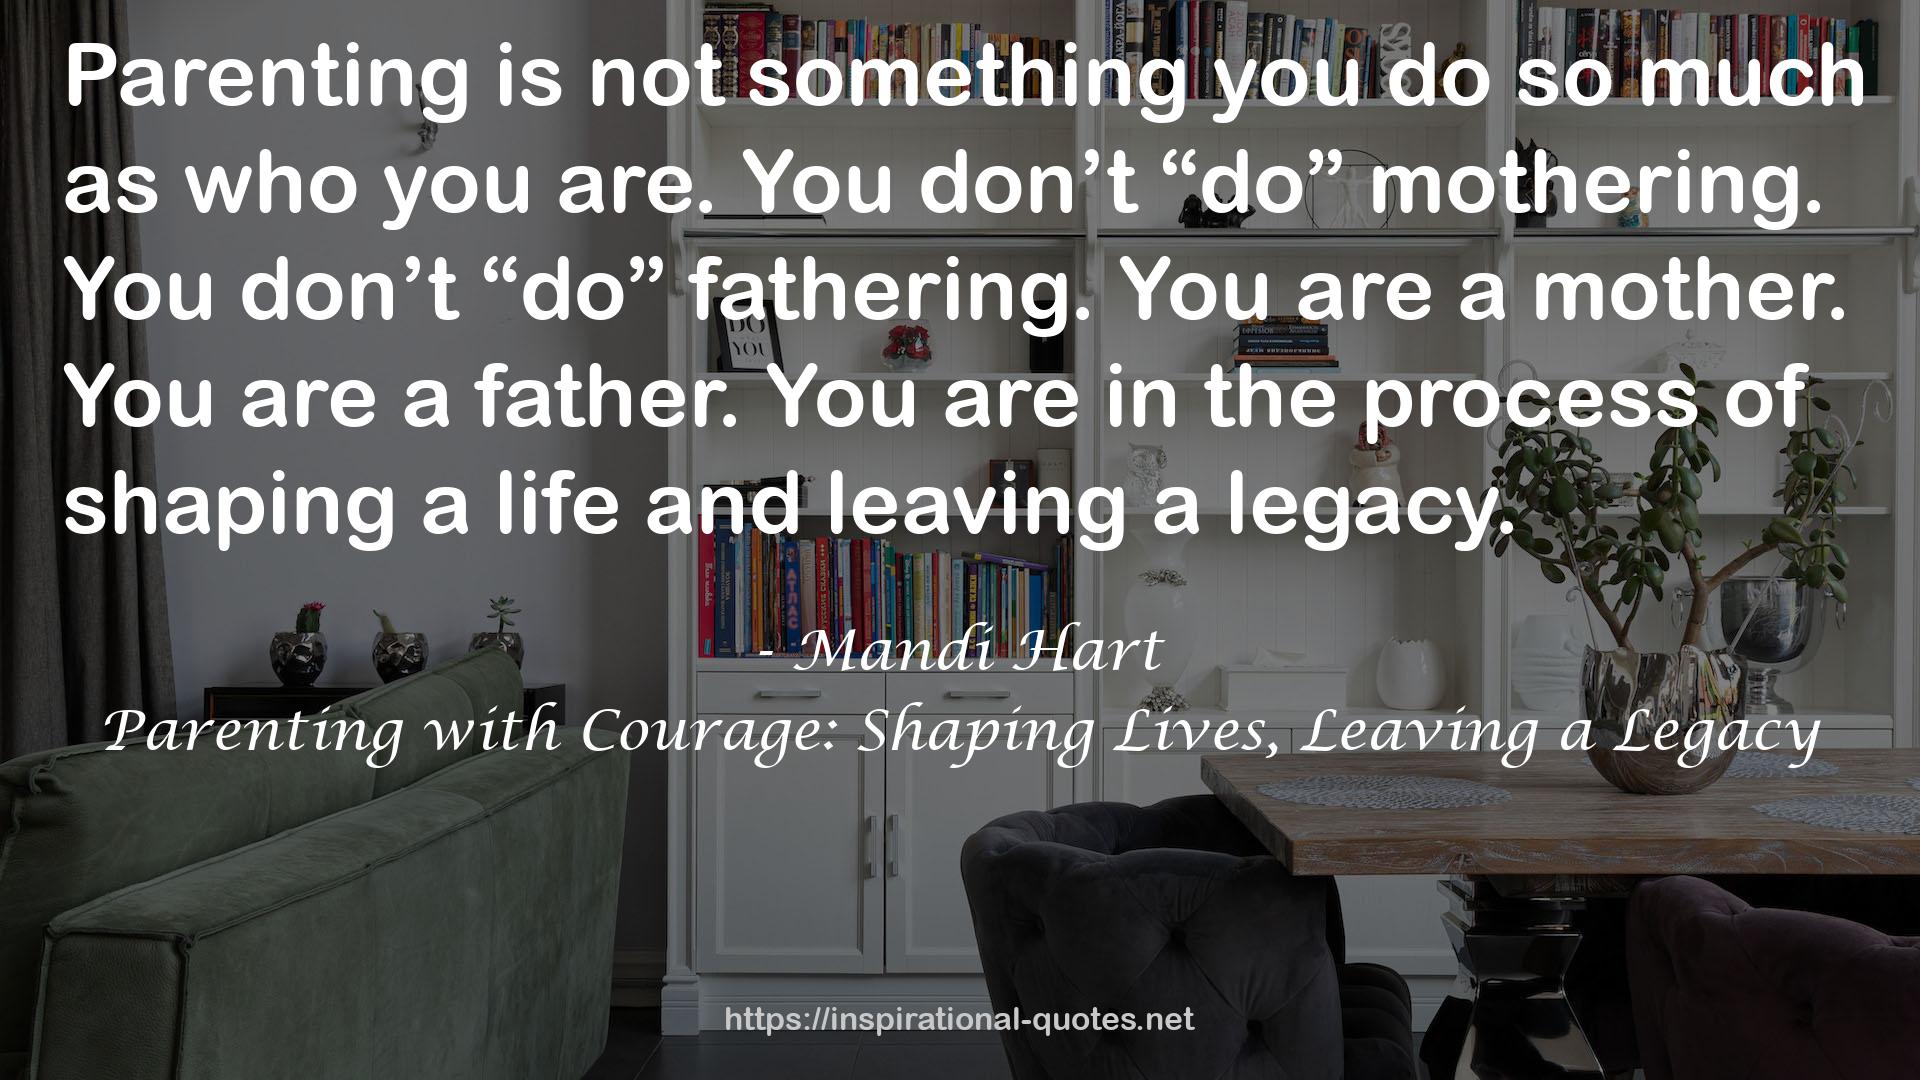 Parenting with Courage: Shaping Lives, Leaving a Legacy QUOTES